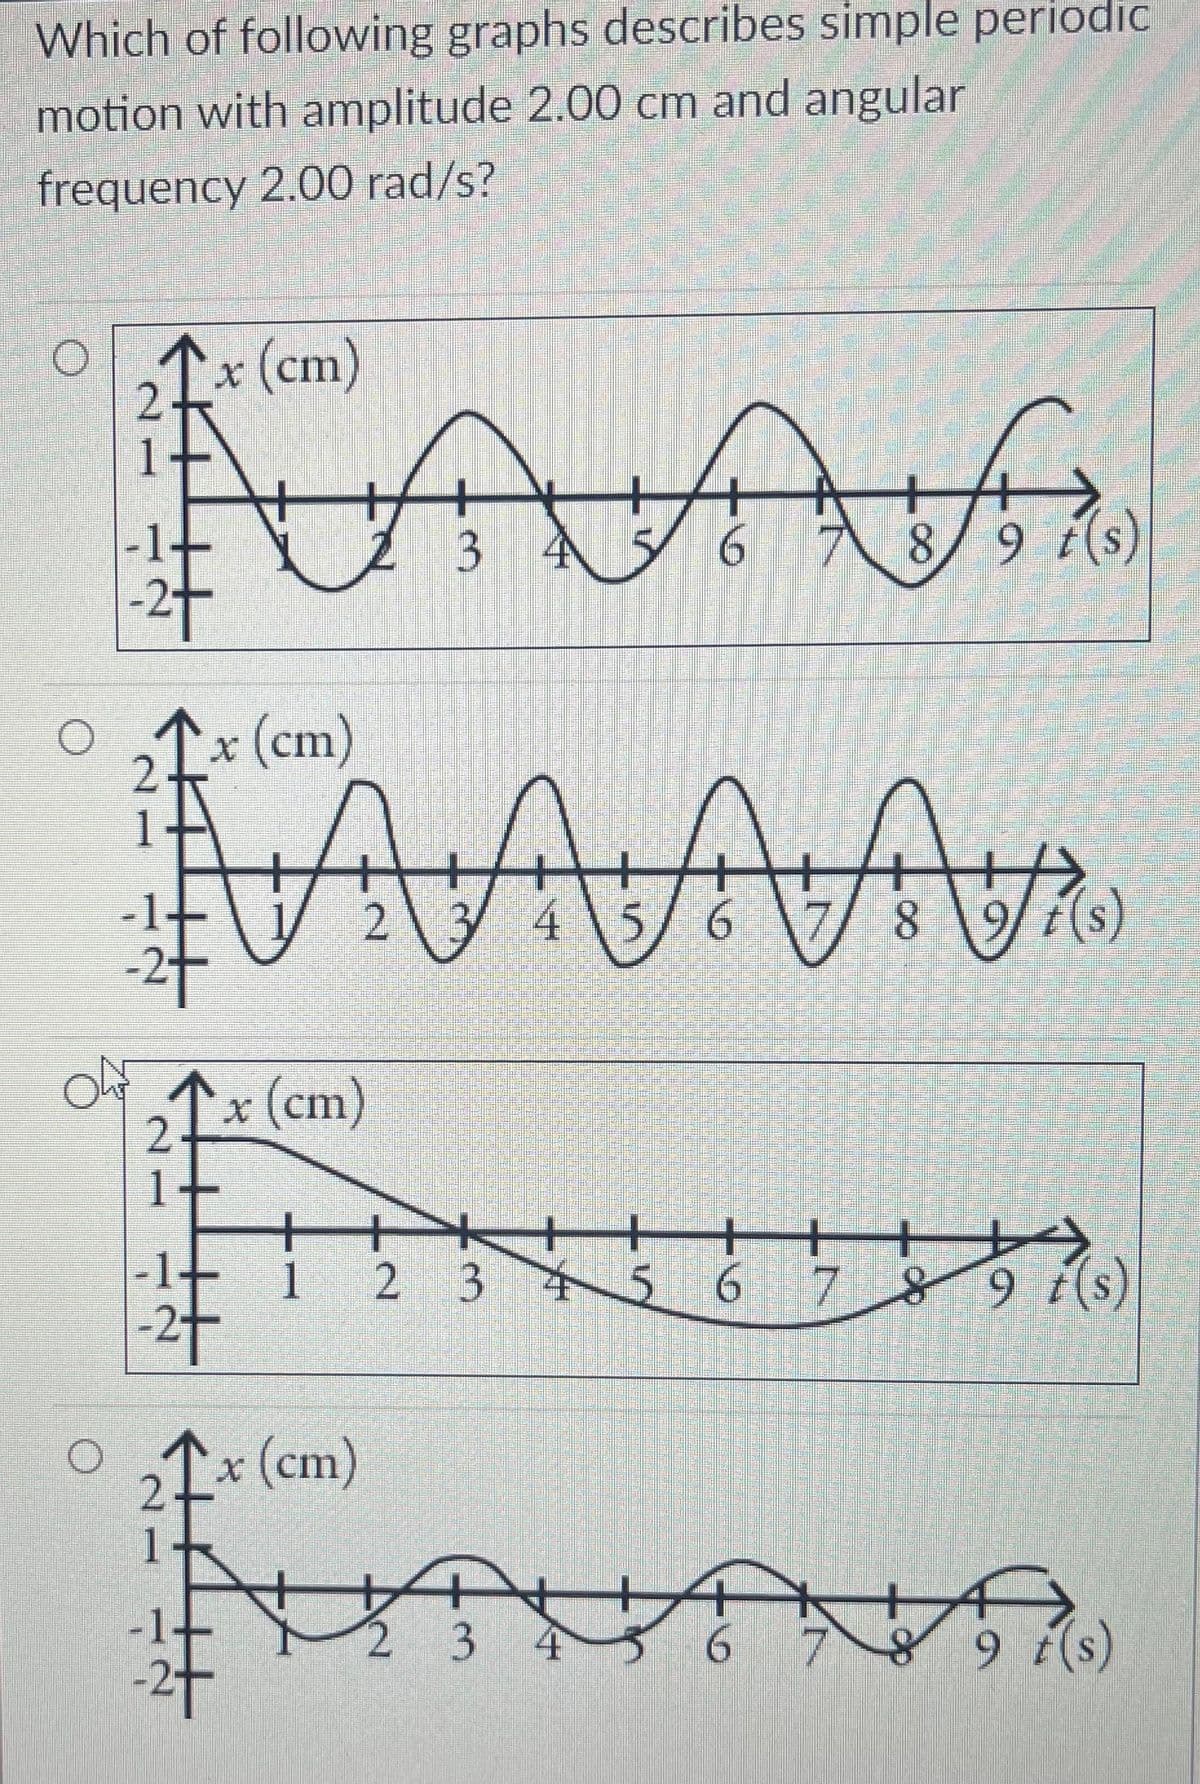 Which of following graphs describes simple periodic
motion with amplitude 2.00 cm and angular
frequency 2.00 rad/s?
x (cm)
2.
पीजीतिपरत
3 4
6
8/9 t(s
to
x(cm)
4 \5/ 6
8.
1x (cm)
1
-1+
1 2 3 s6 7 89 t(s,
++
-2+
x (cm)
2-
1
3 4
6 789 (s)
